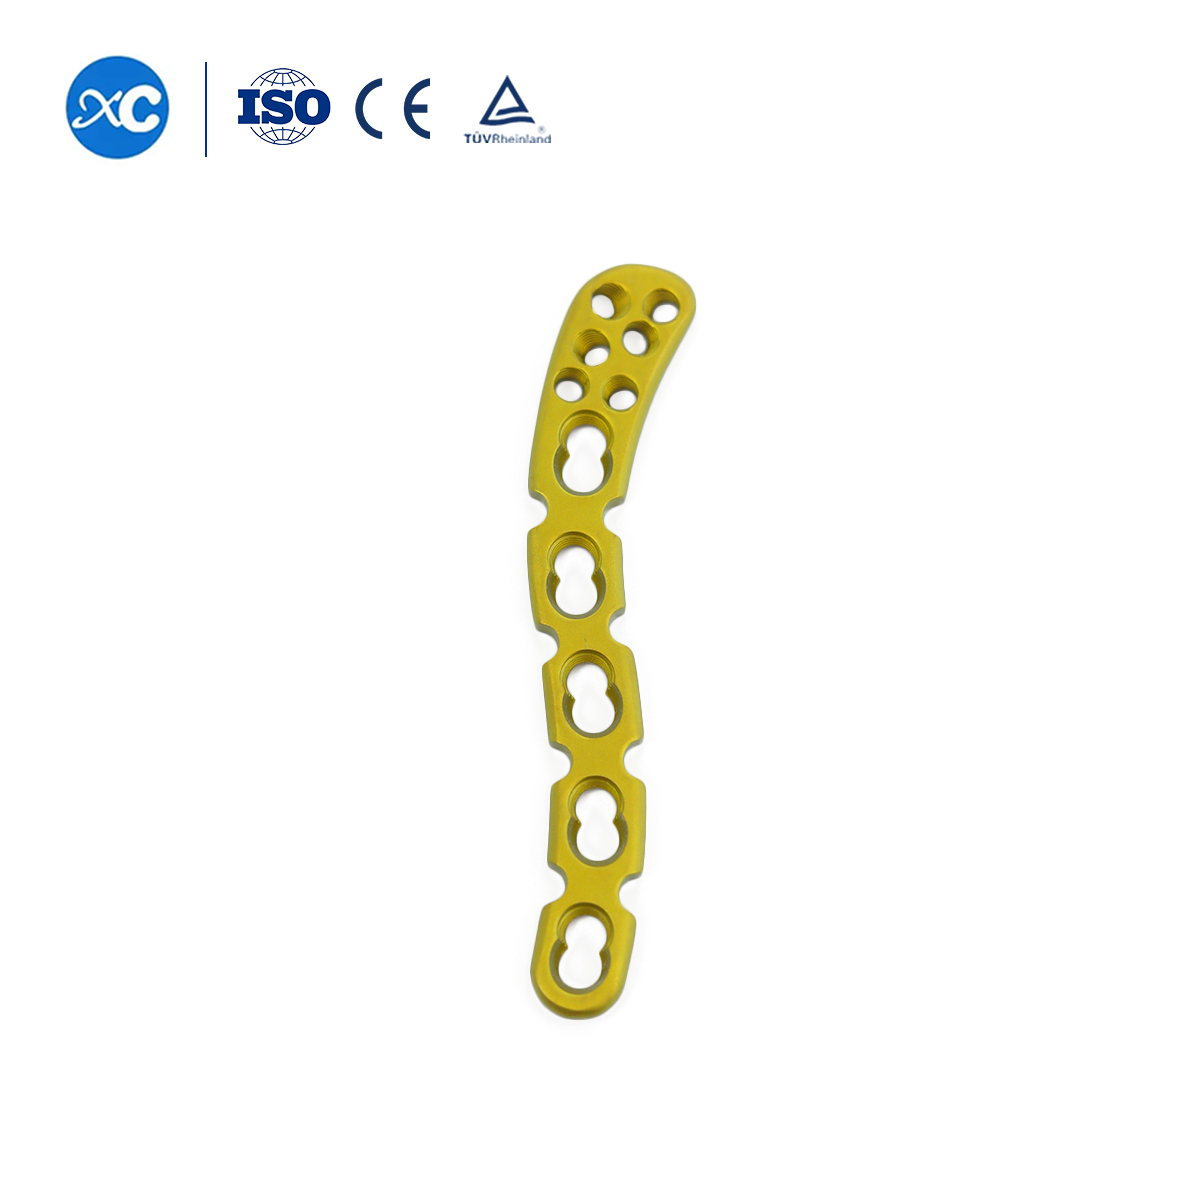 Distal Clavicle locking plate